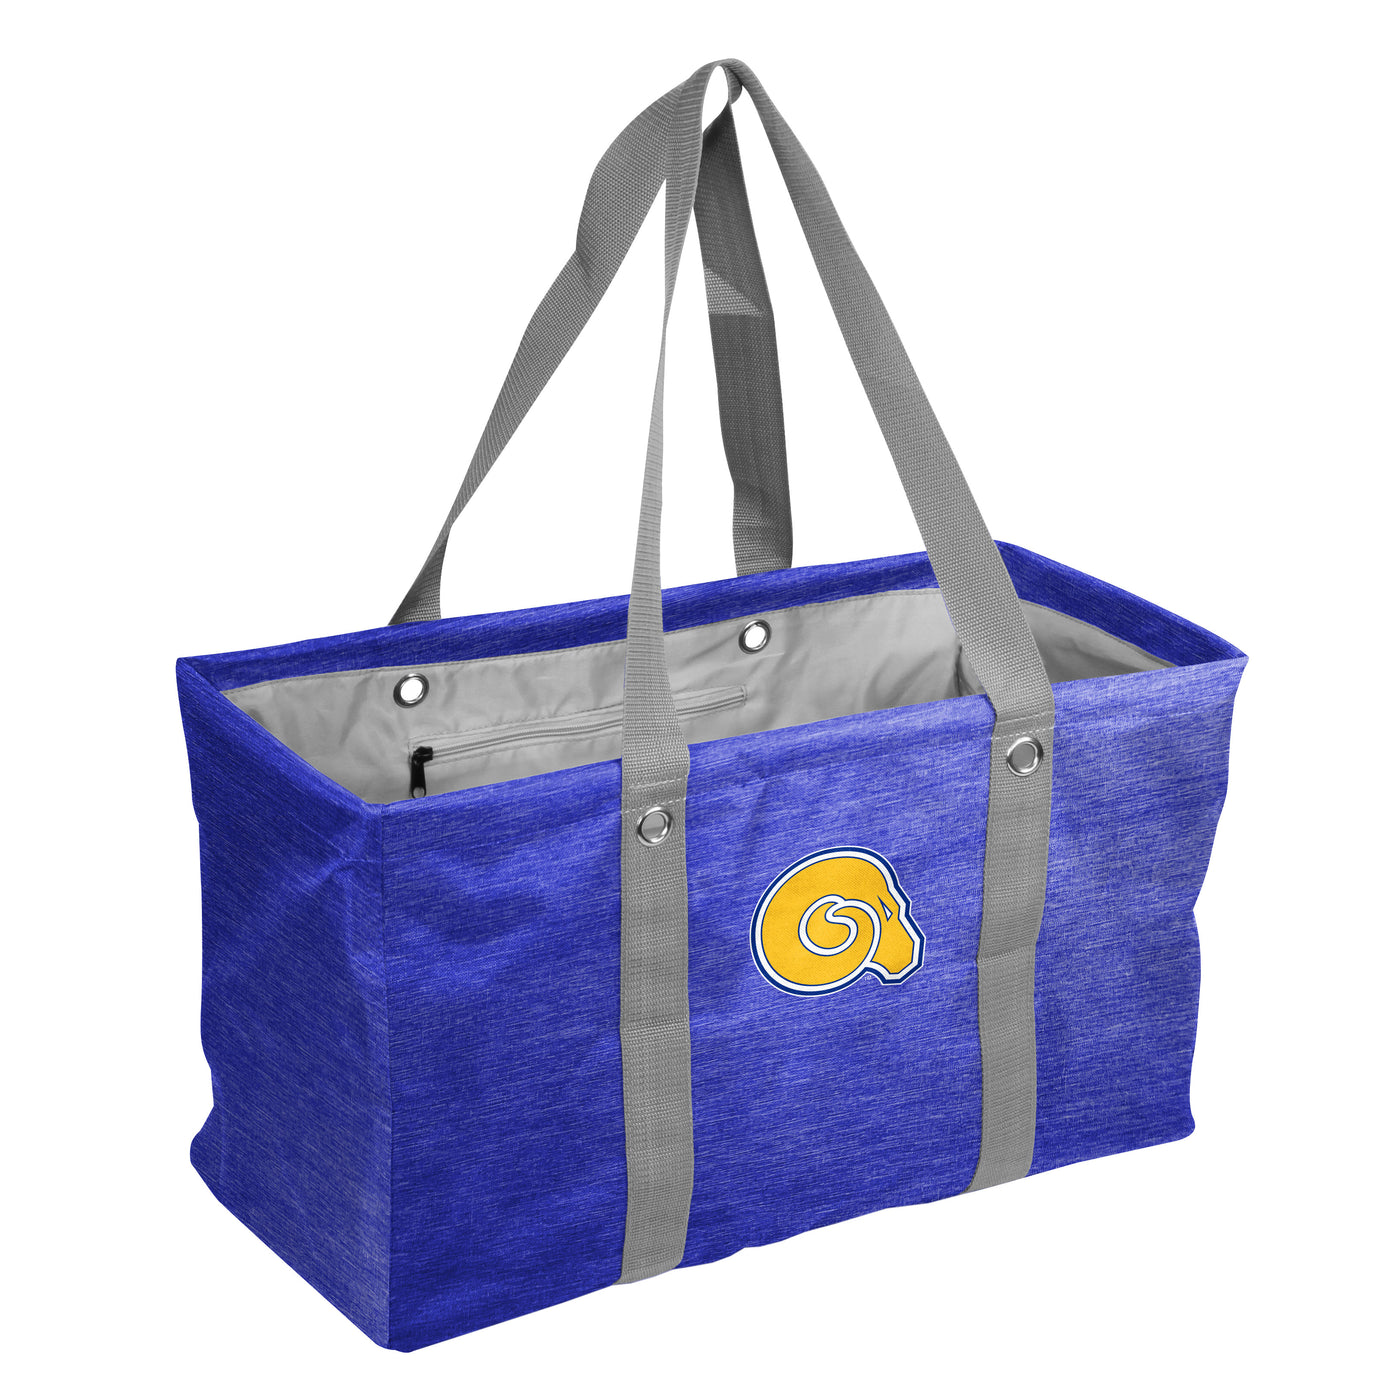 Albany State Picnic Caddy